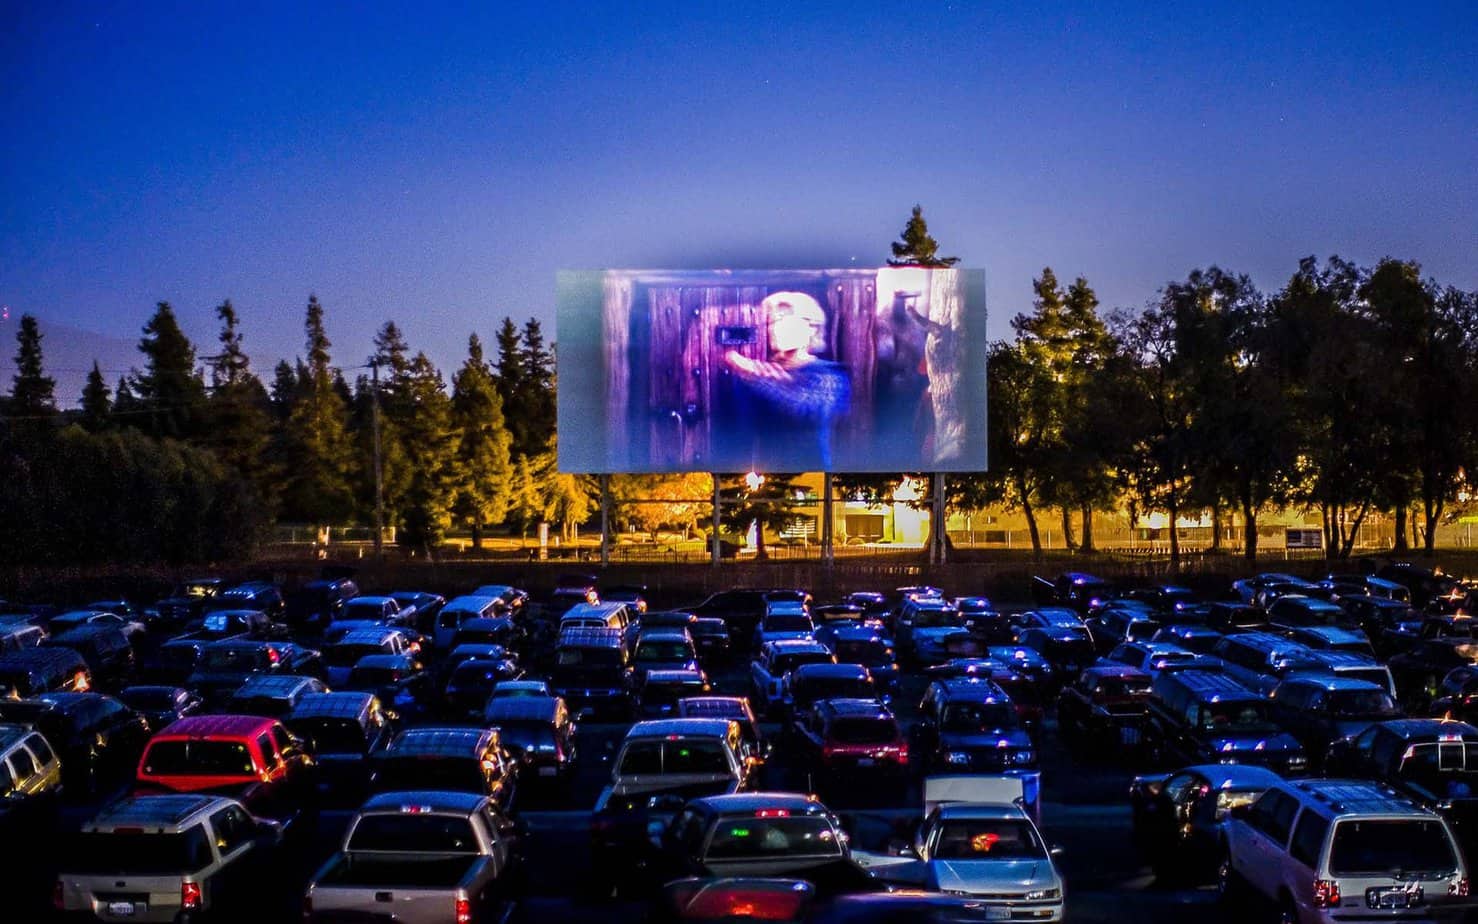 Diners, Drive-Ins and Movies - Restaurants Turn Parking Lots into Drive-In Movie Theaters